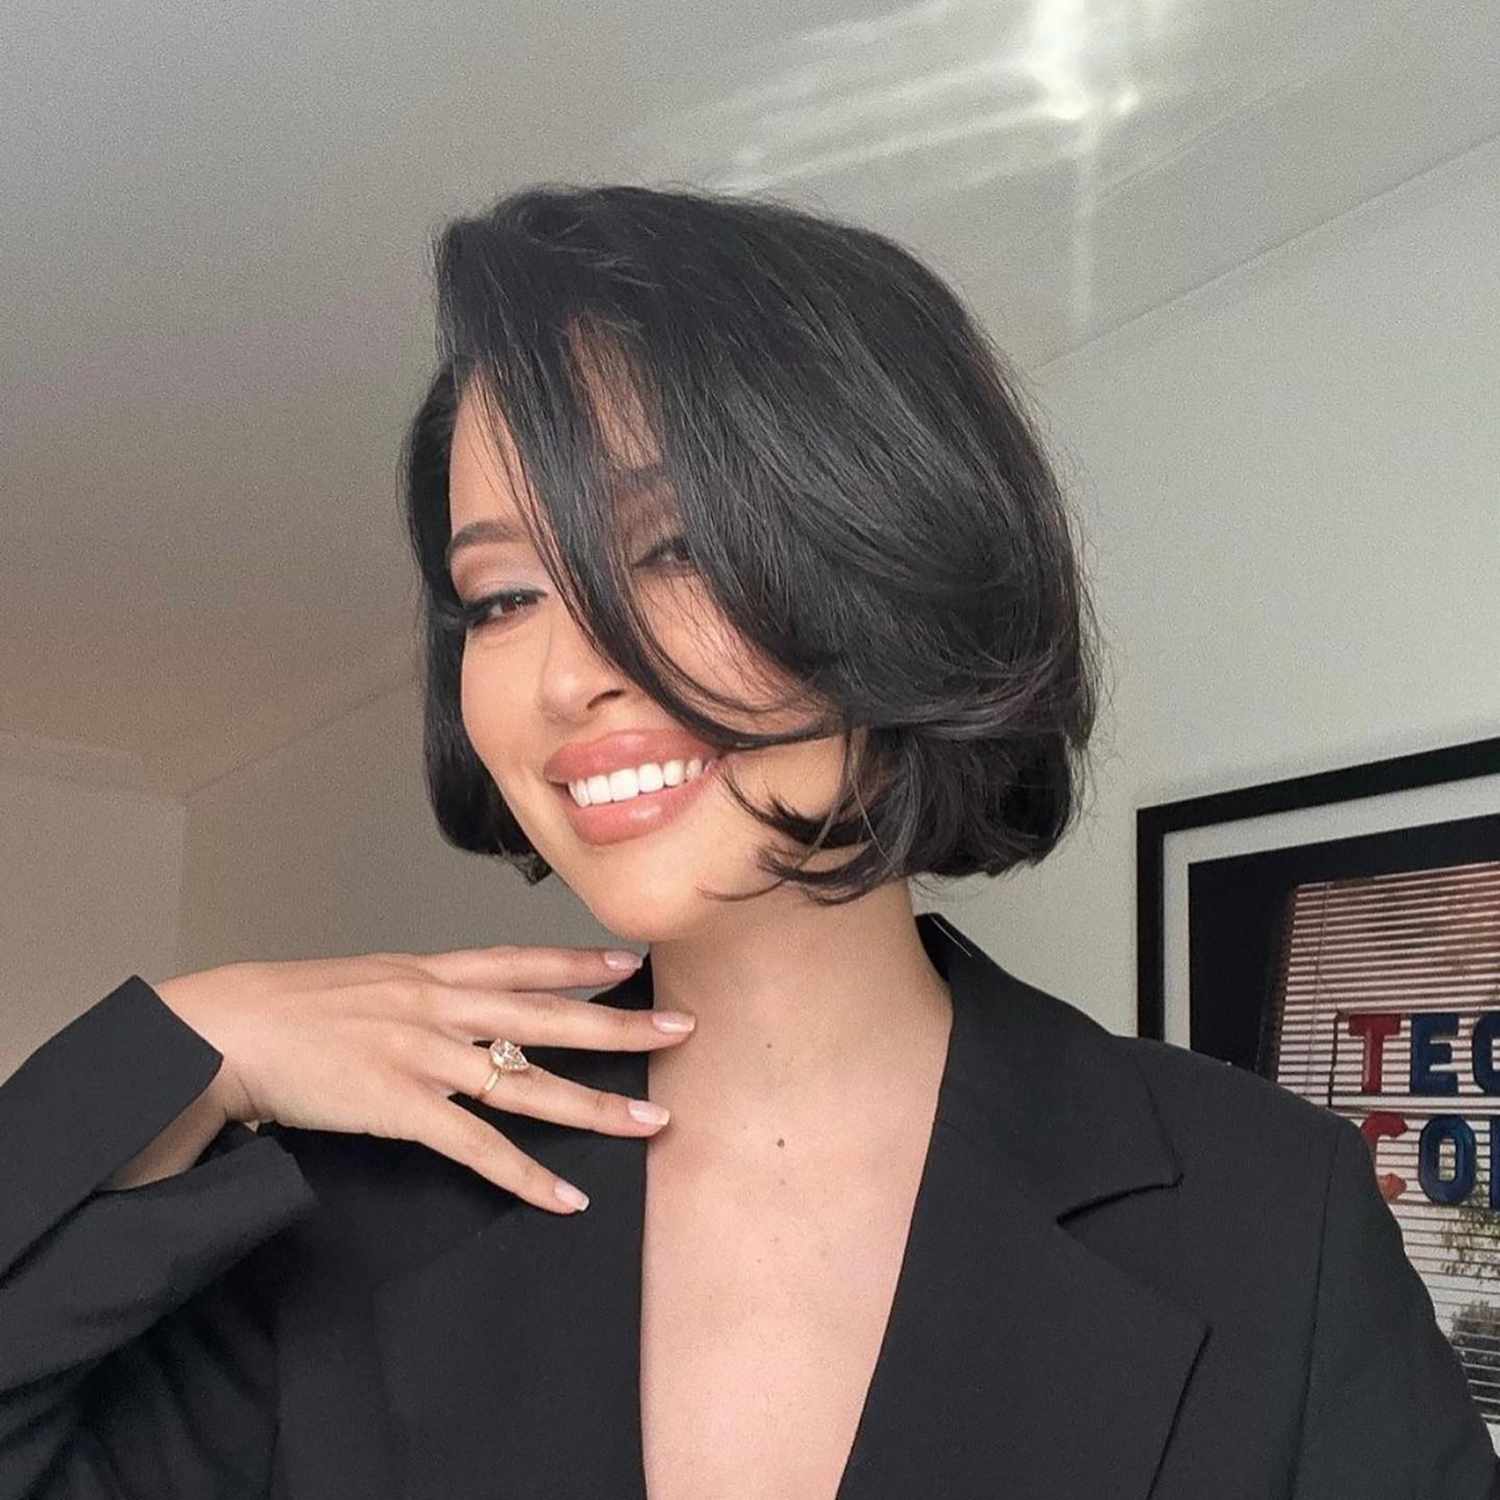 Actor Christian Serratos with a thick, layered, fluffy bob